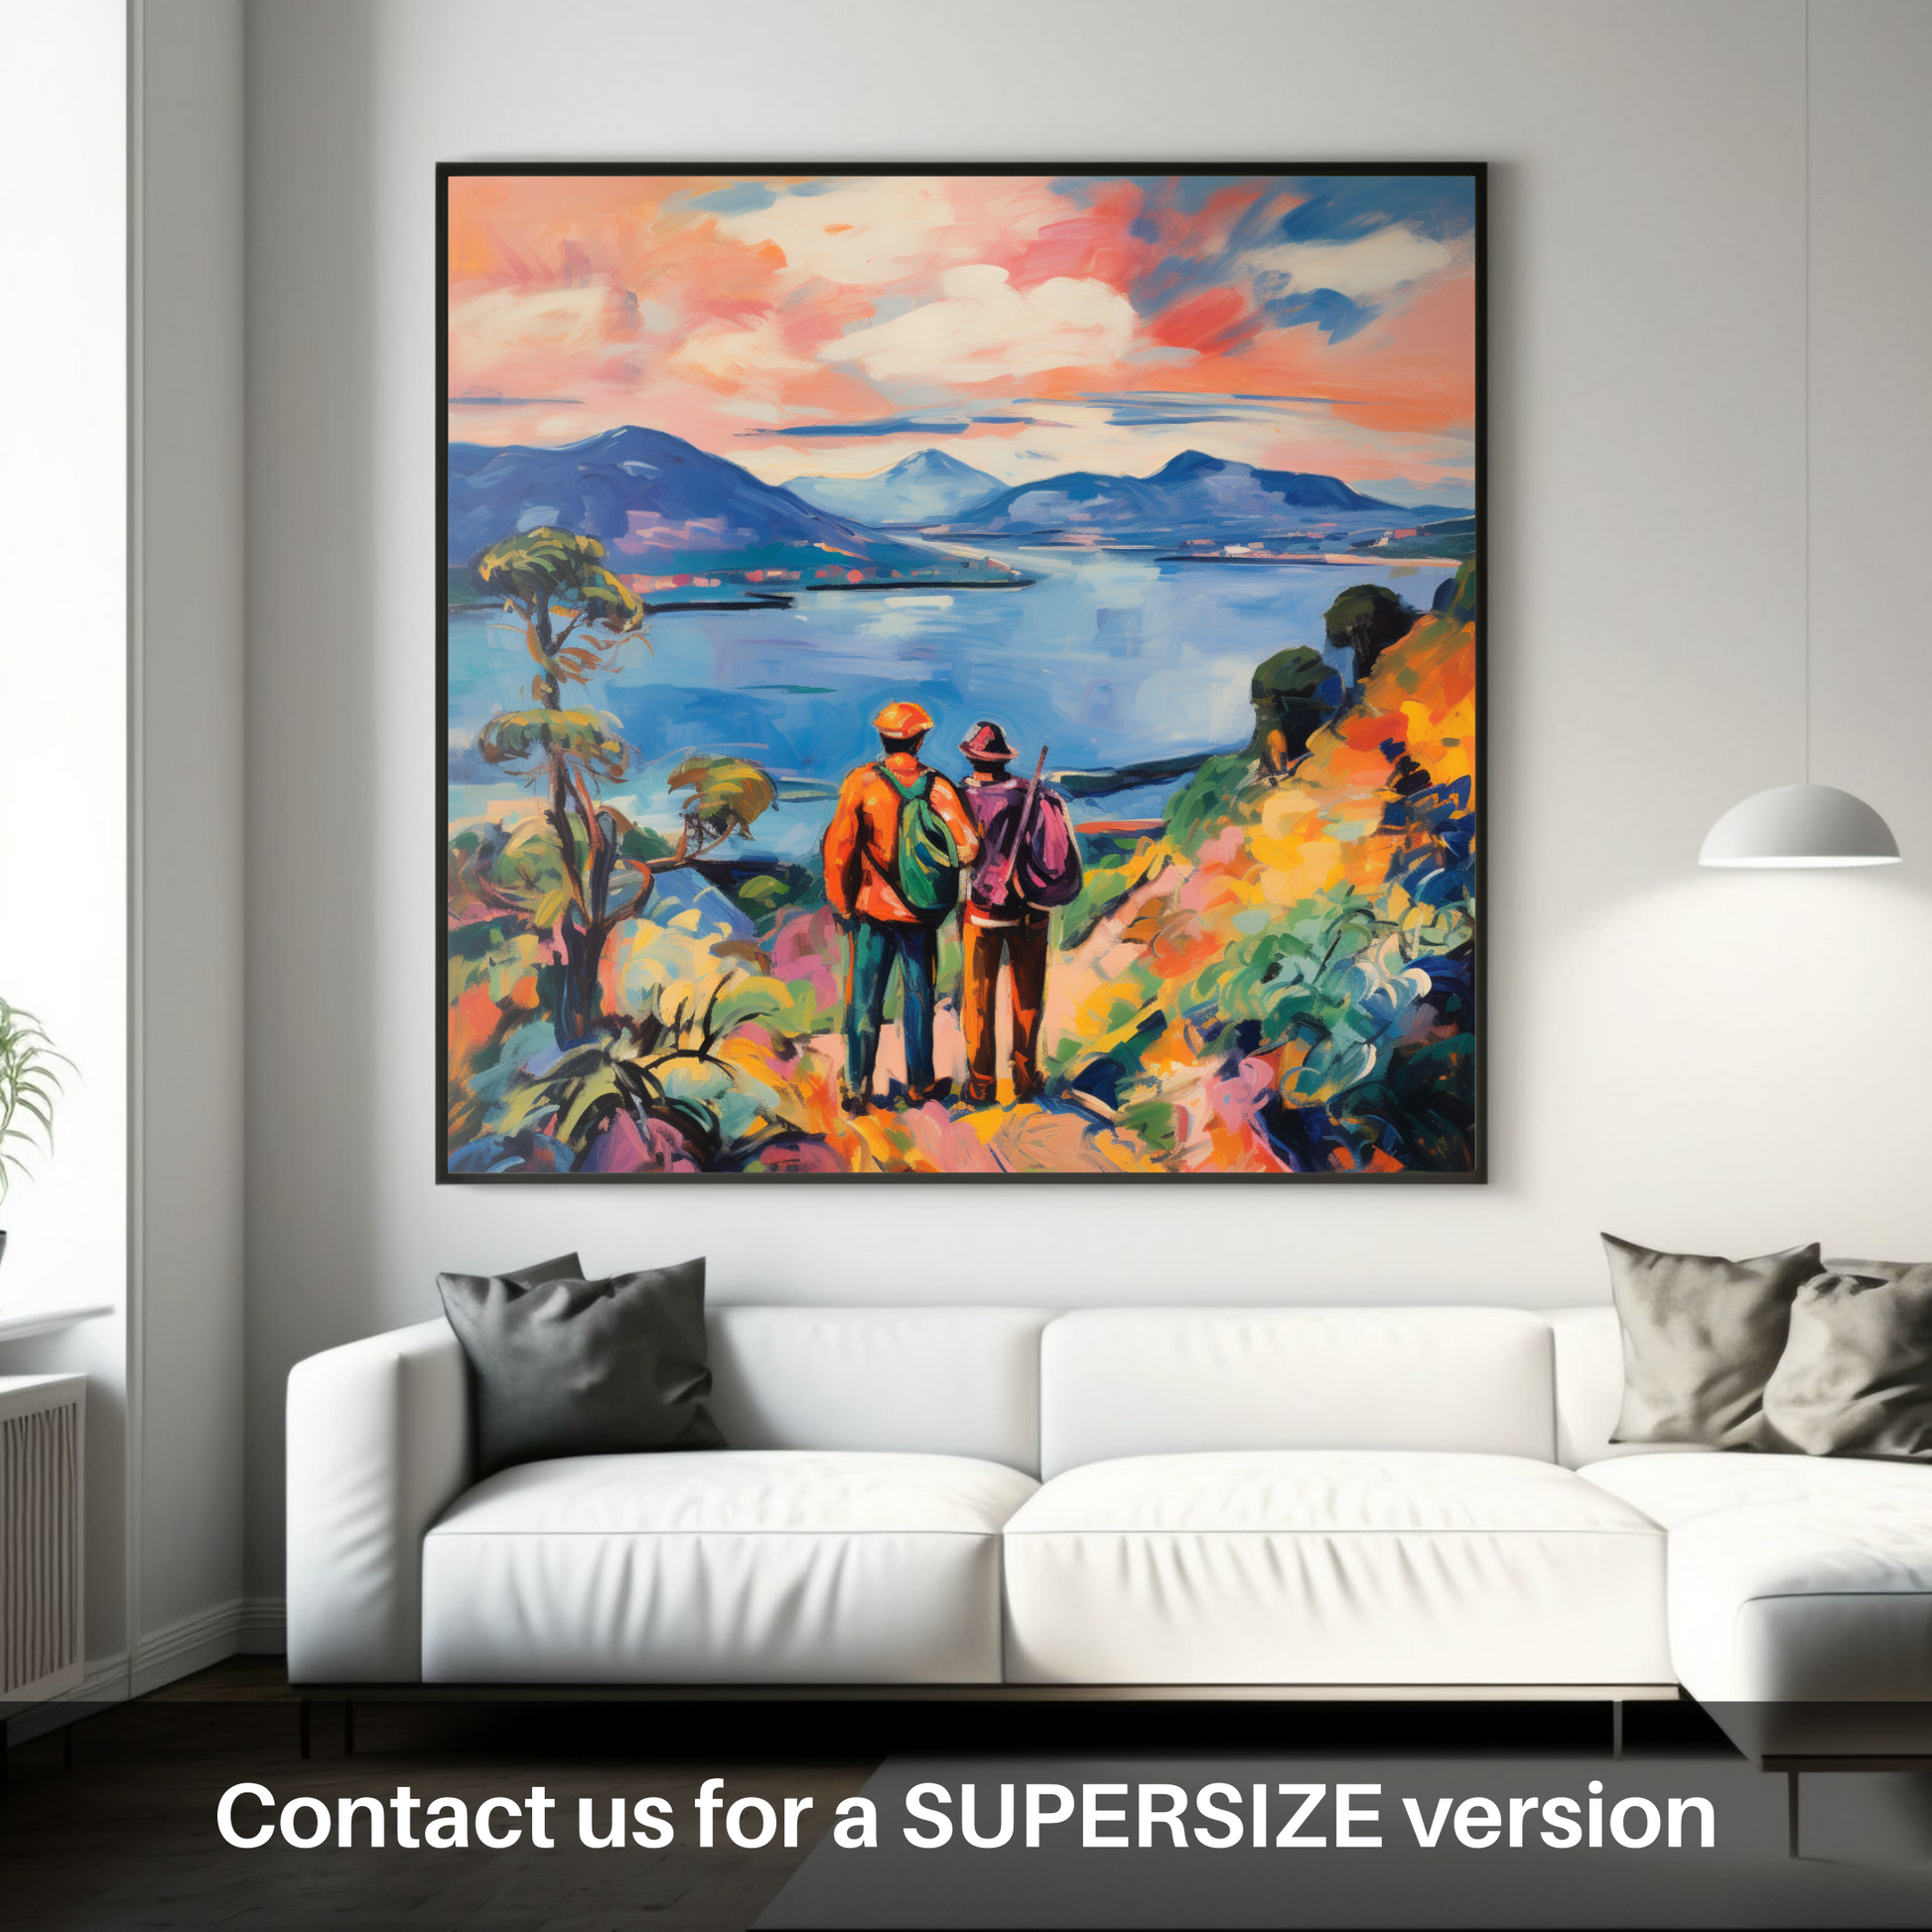 Huge supersize print of Two hikers looking out on Loch Lomond